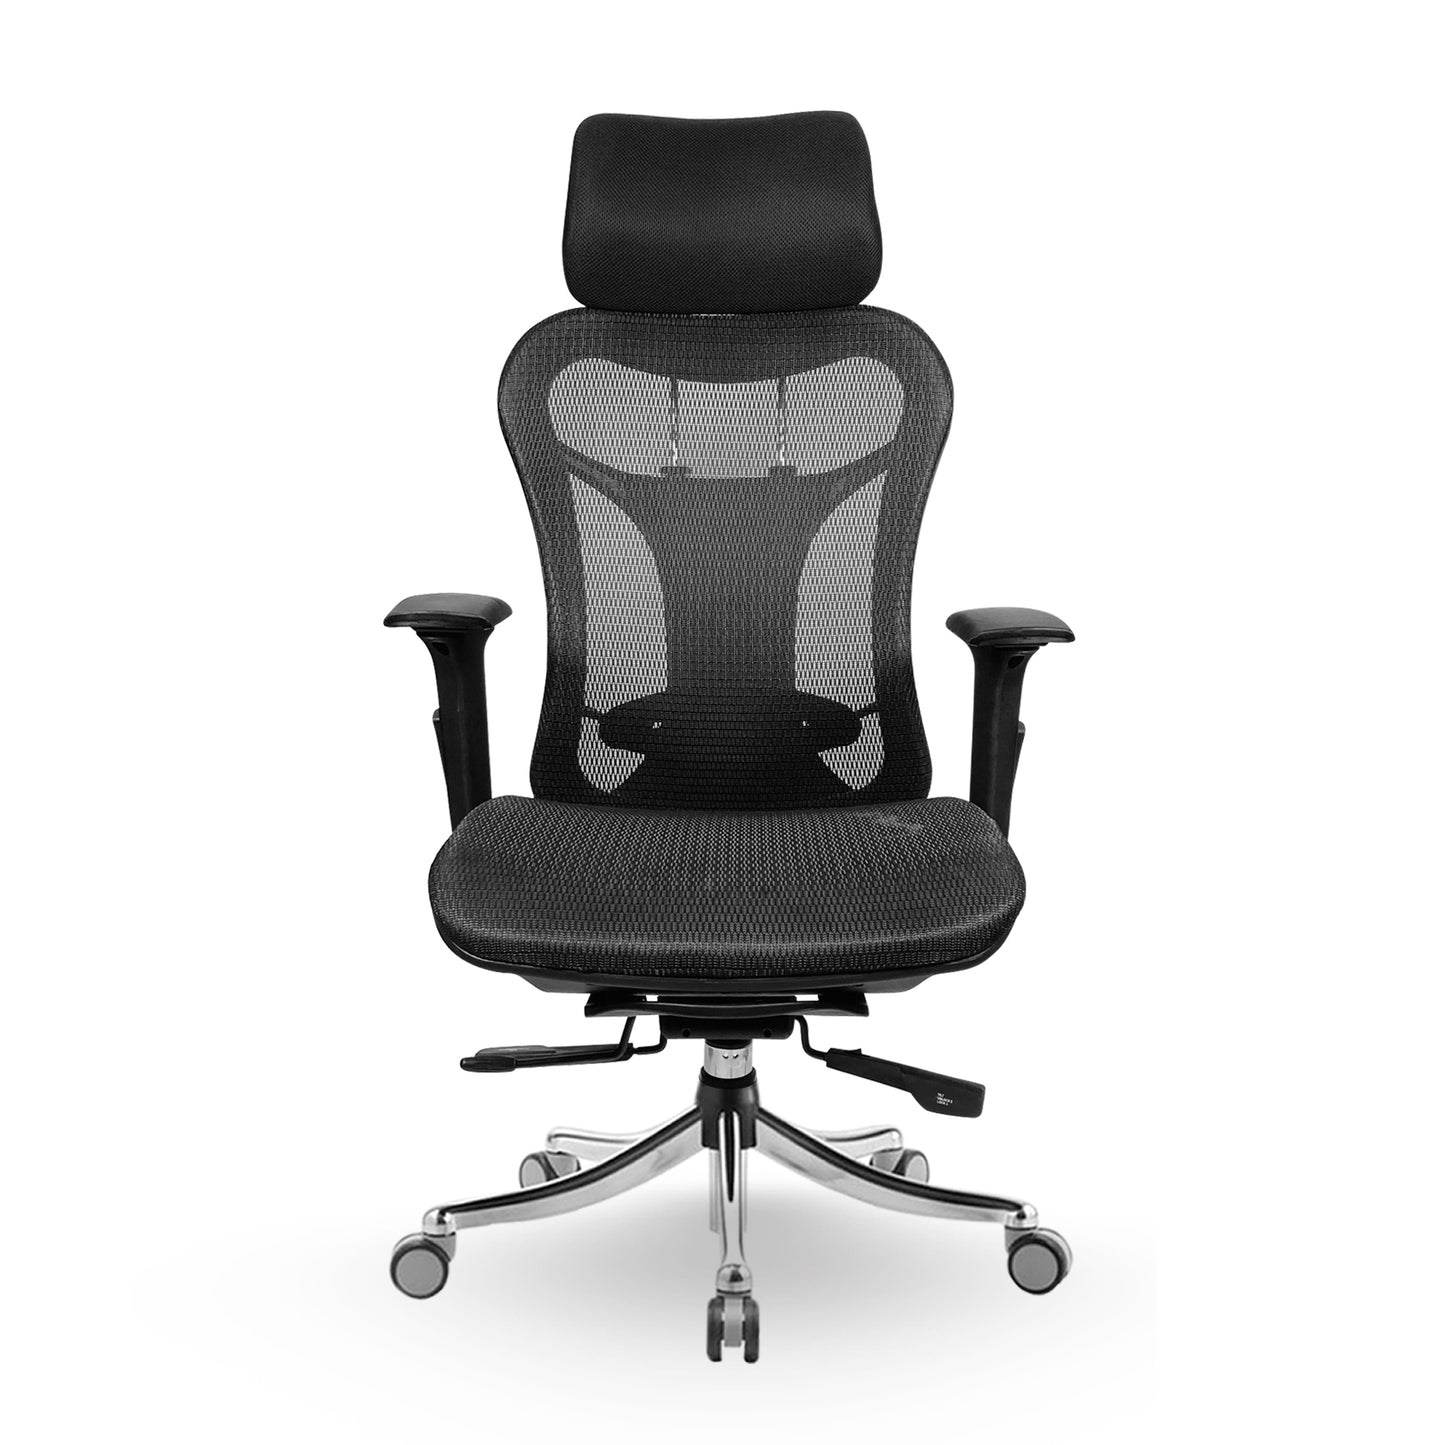 Optimus Elite Mesh Seat High Back Chair Director Chairs - makemychairs